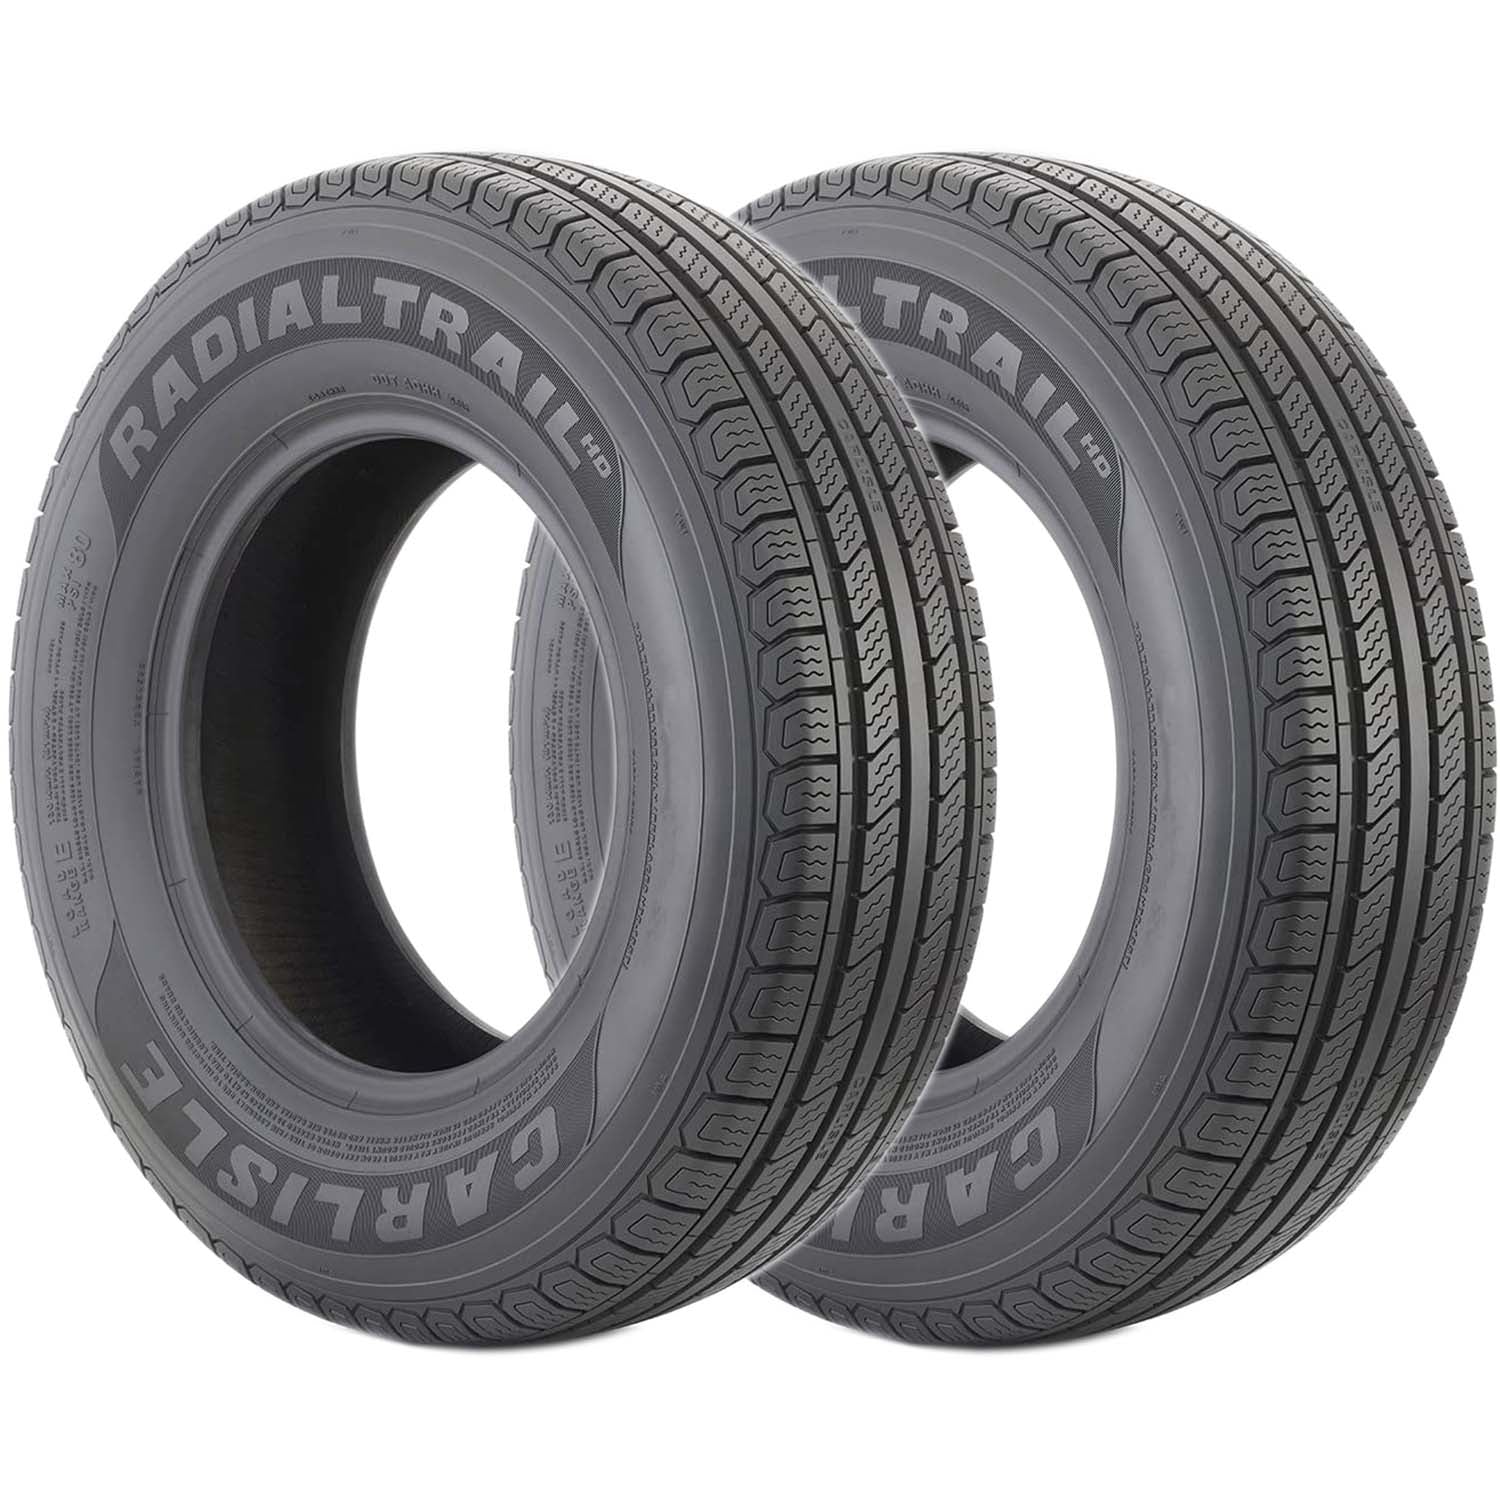 Carlisle Radial Trail HD Trailer Tire LRE 10ply ST235/85R16 Pack of 2